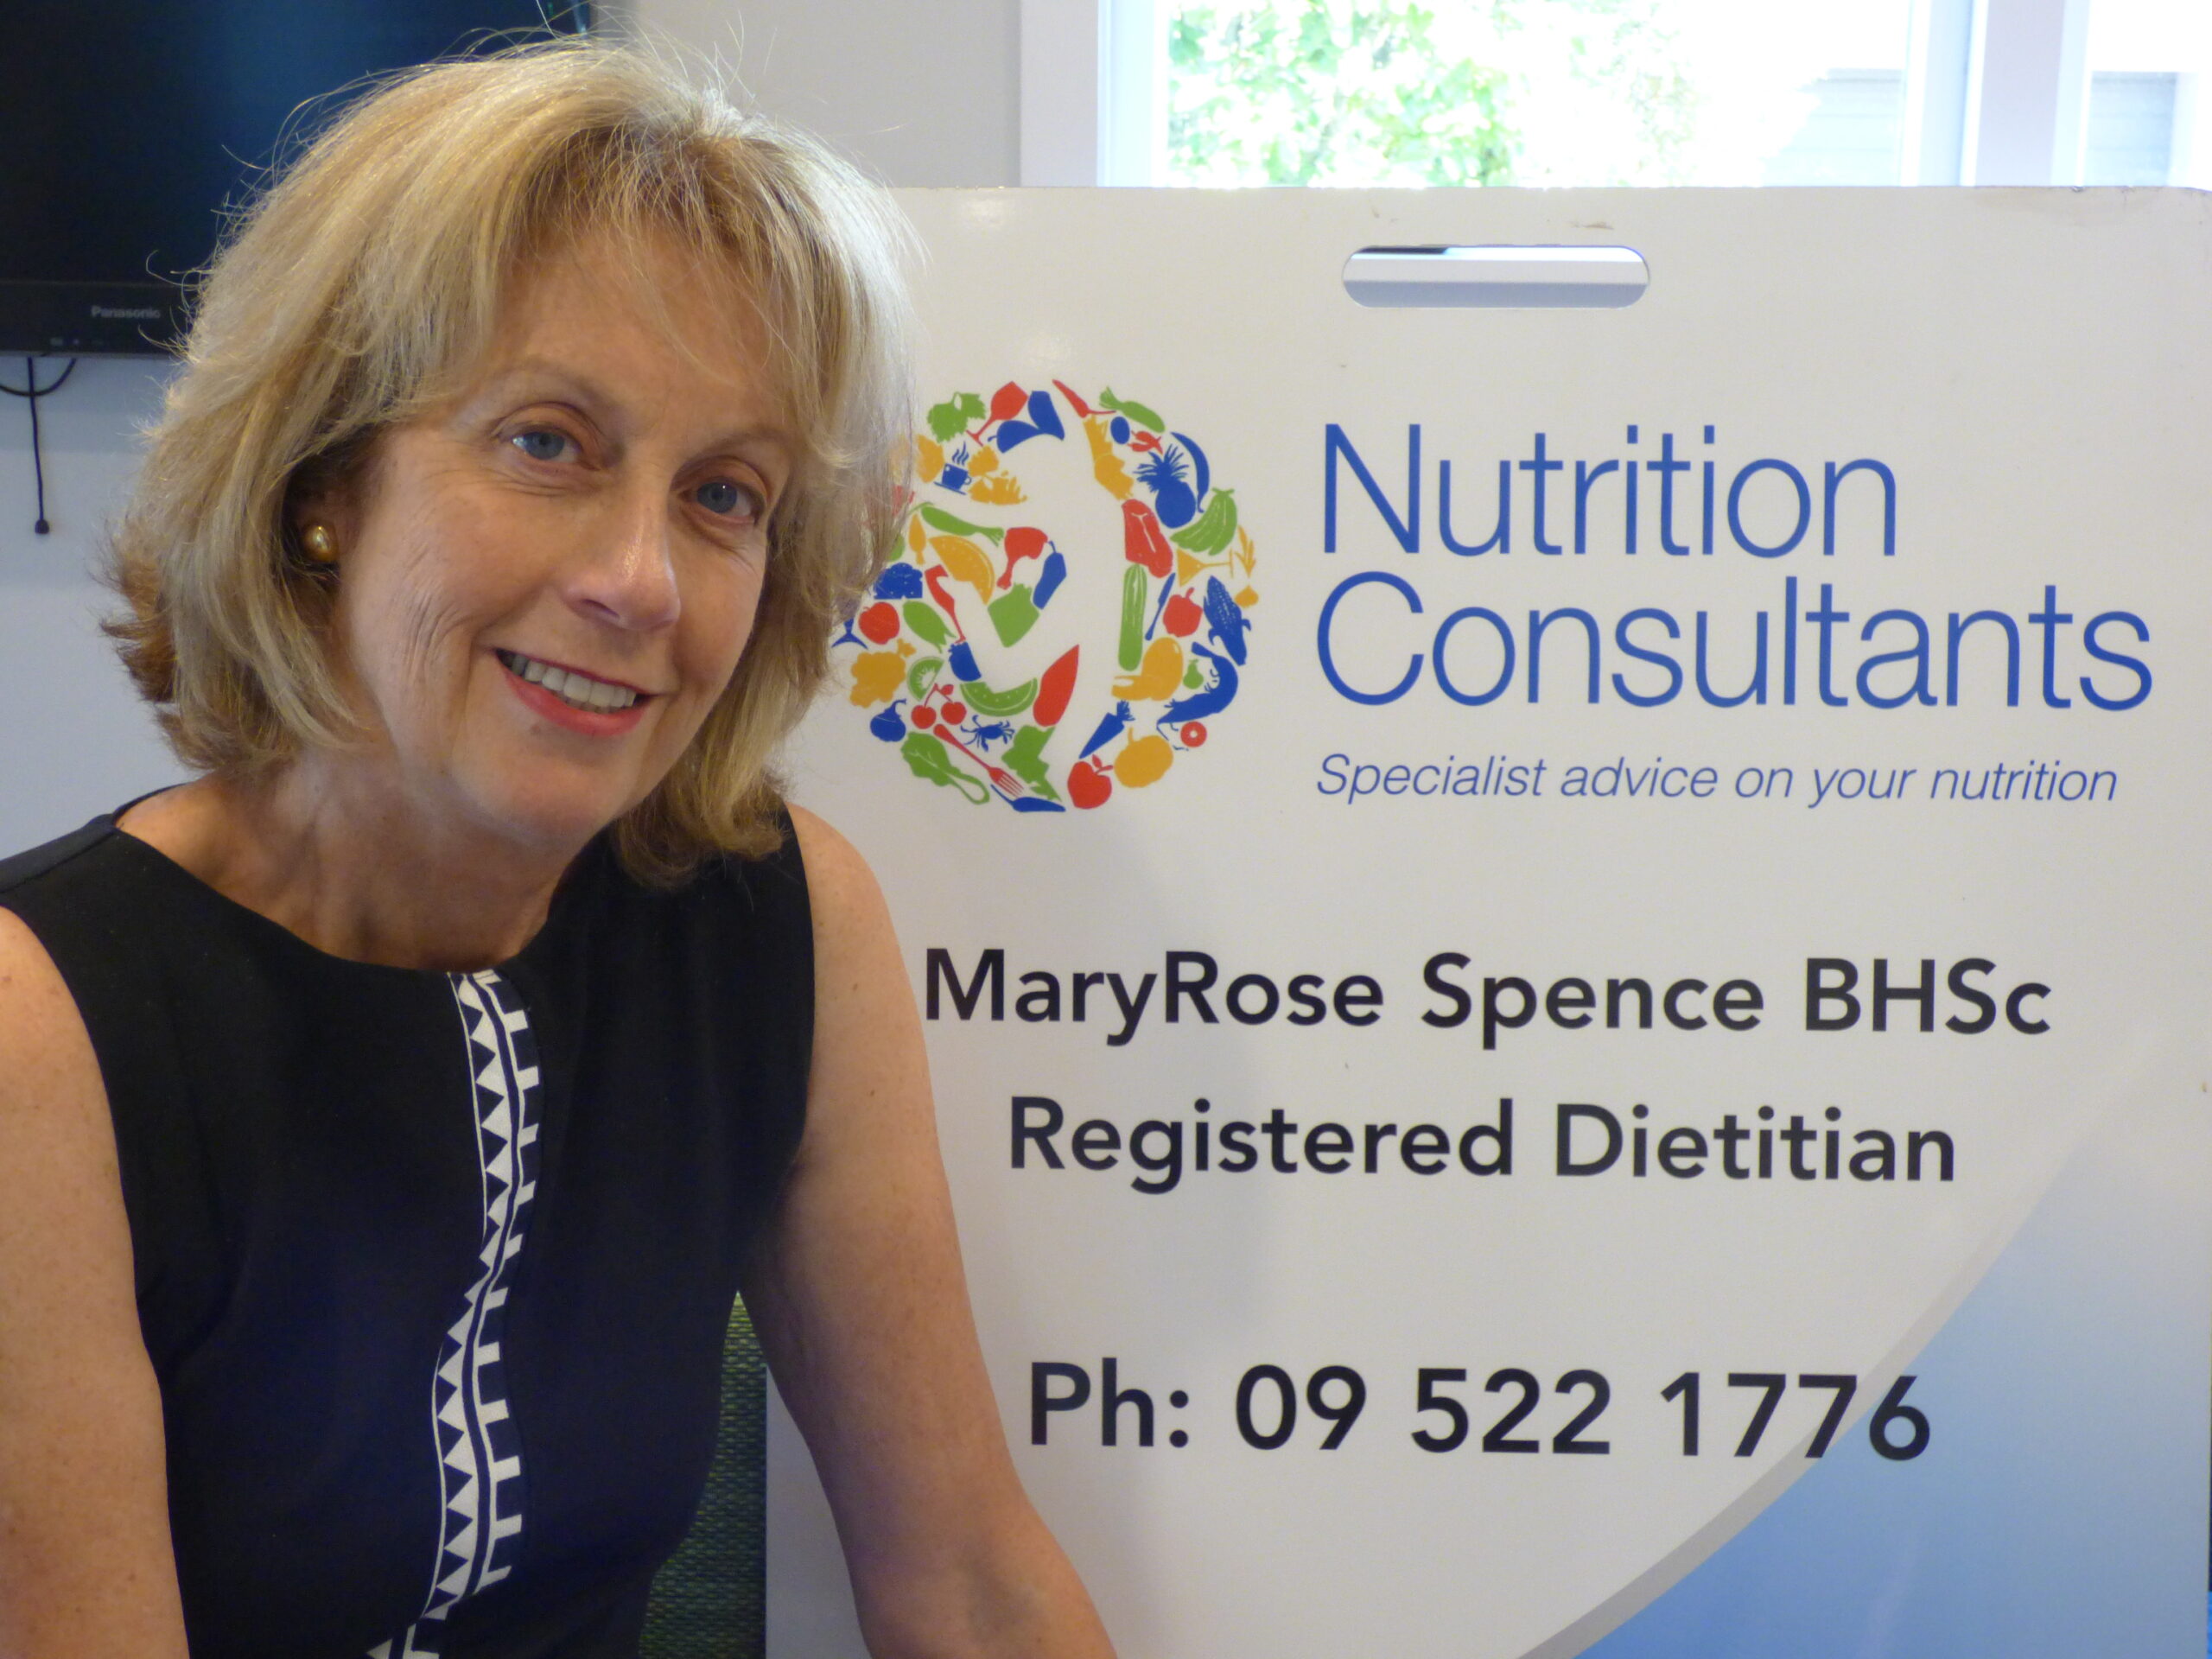 Nutrition Consultants stick to science